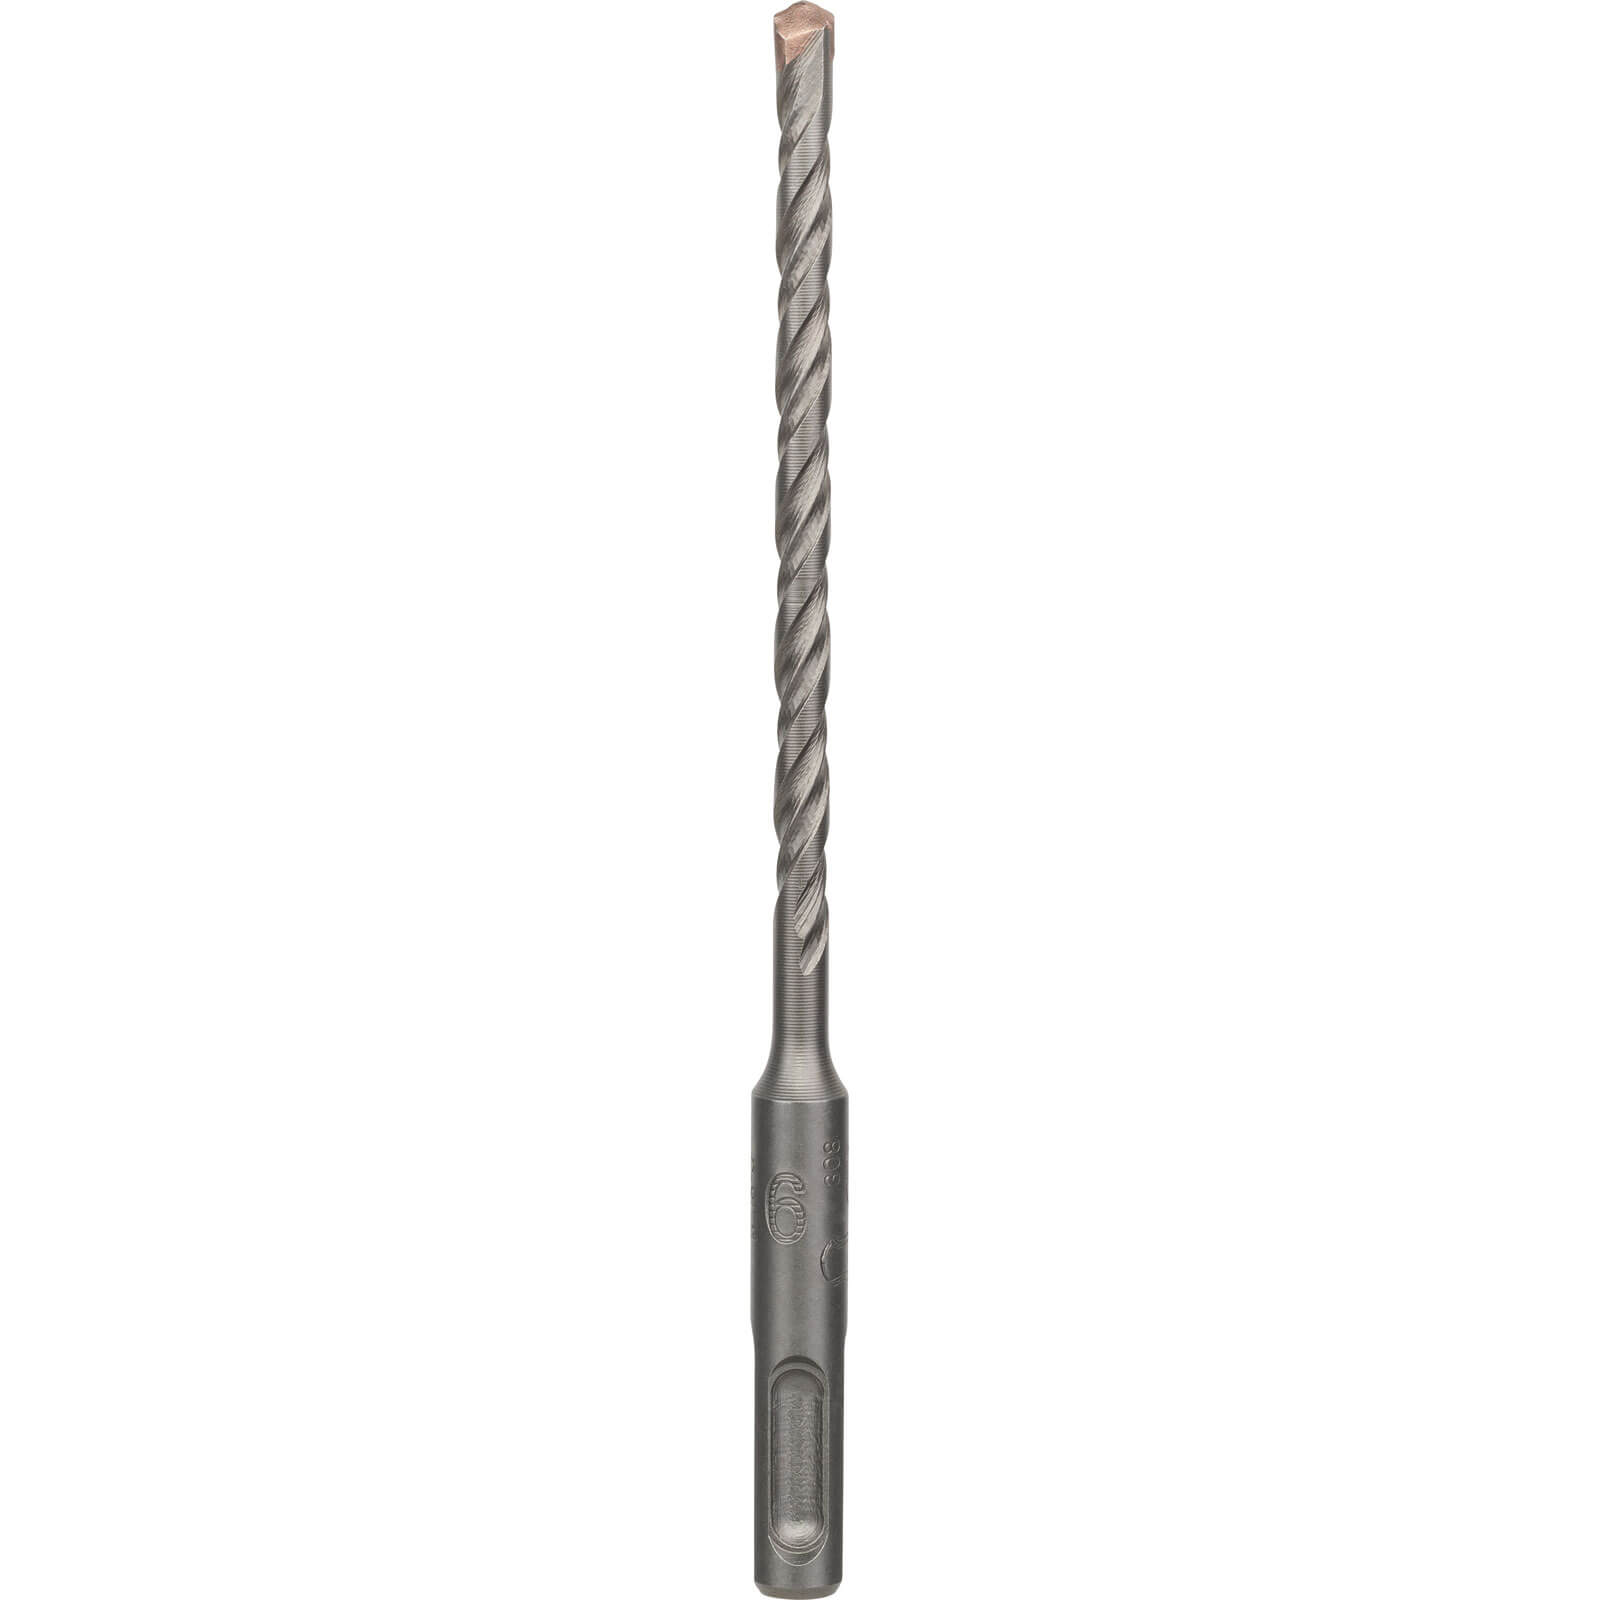 Image of Bosch Series 3 SDS Plus Masonry Drill Bit 6mm 160mm Pack of 1